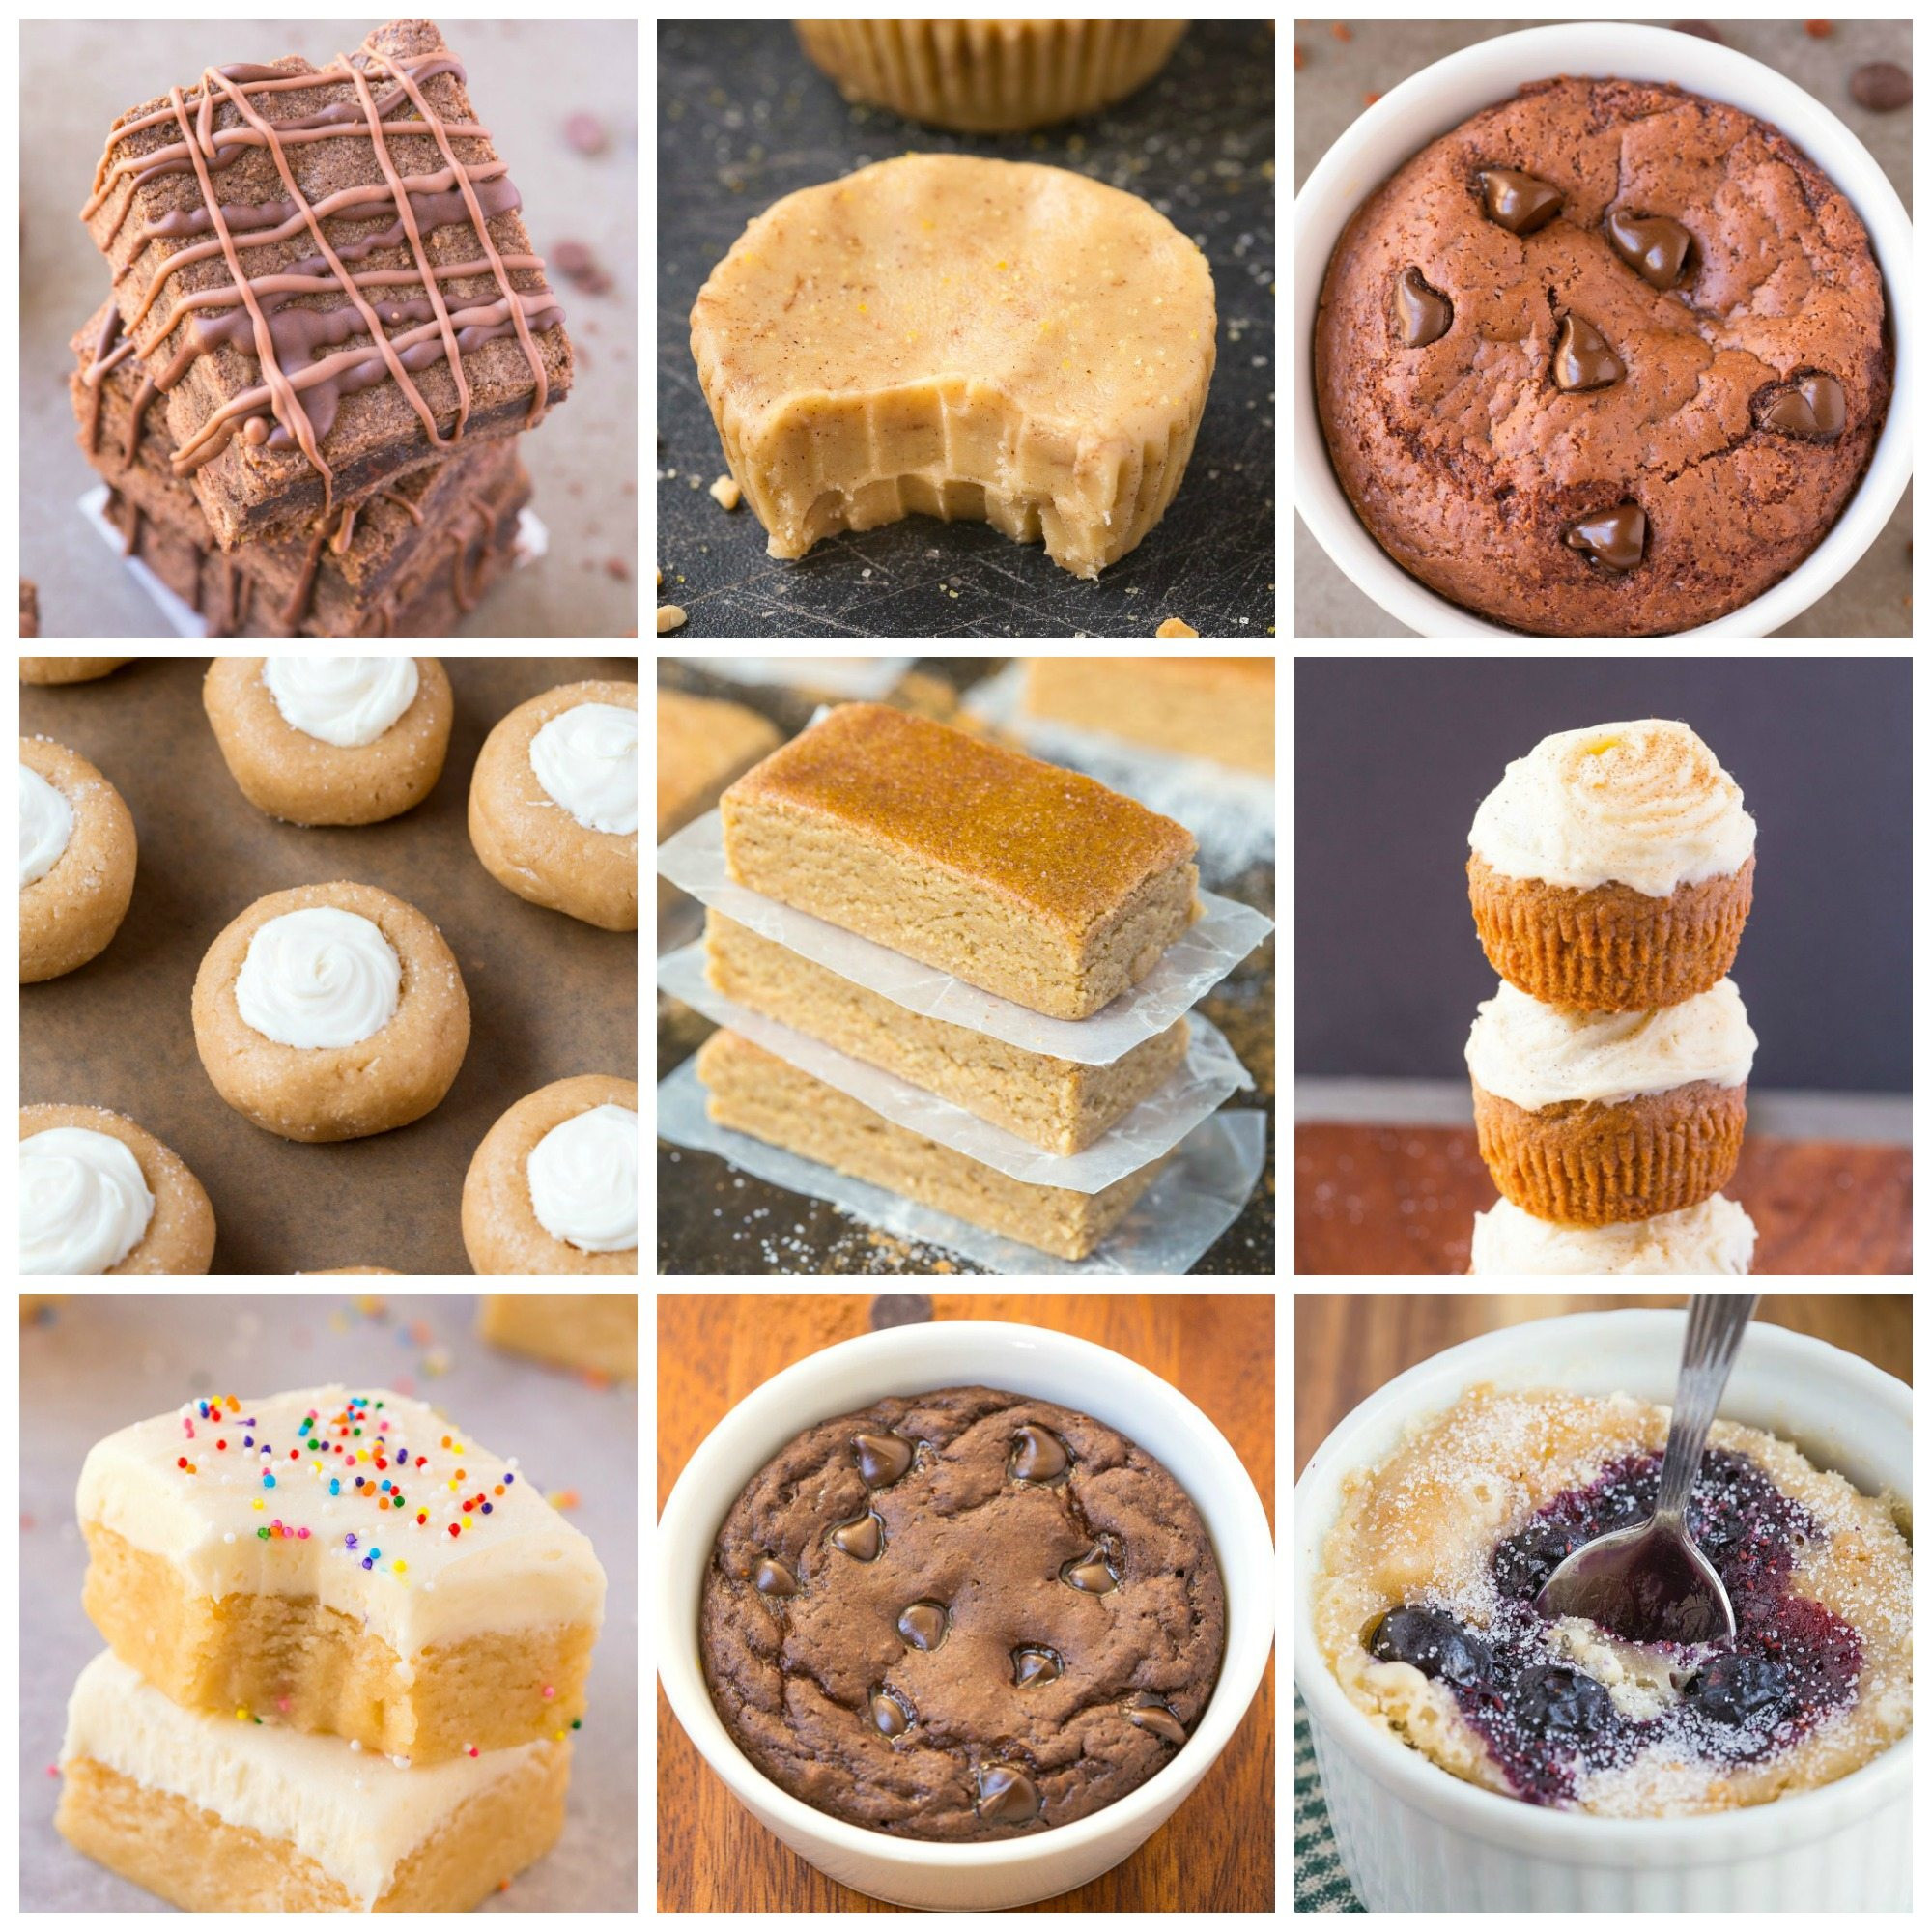 Sweet Healthy Snacks
 15 Healthy Desserts and Snacks Under 200 Calories